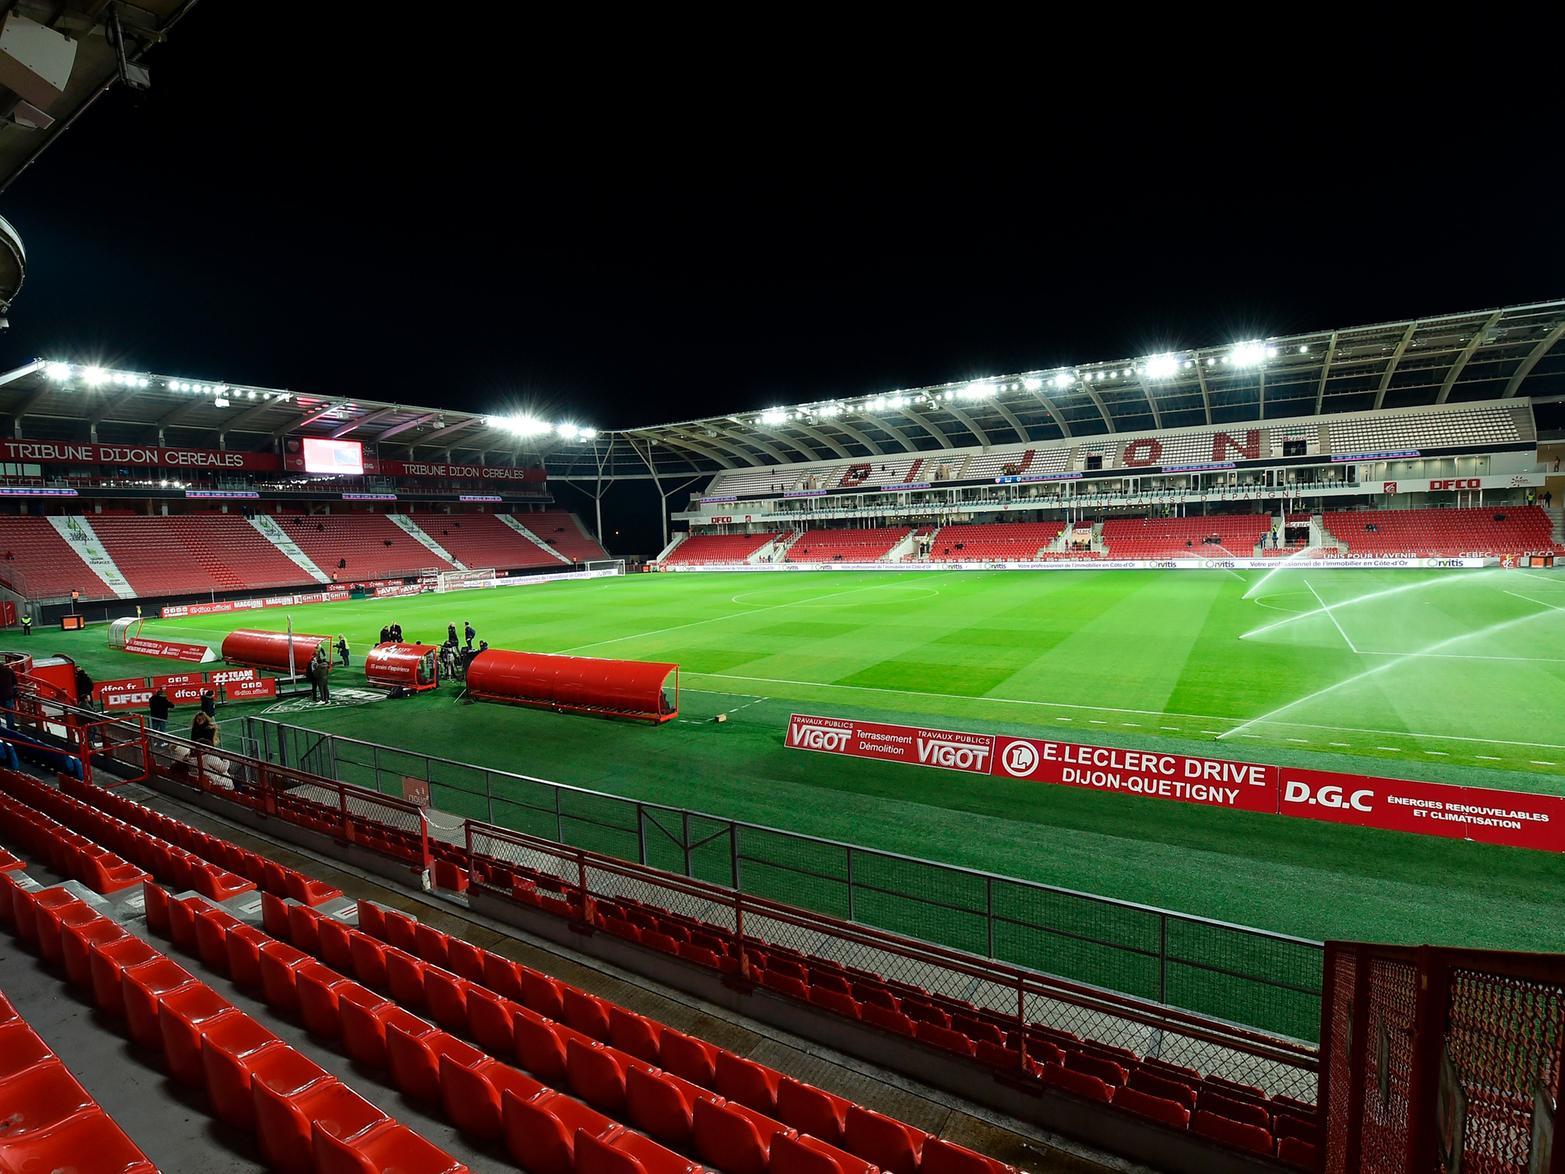 Scouts from both Nottingham Forest and Blackburn Rovers were said to be in attendance at a Ligue 1 clash between Dijon and Paris Saint-Germain last weekend, as they looked to spot talented young players. (Sport Witness)